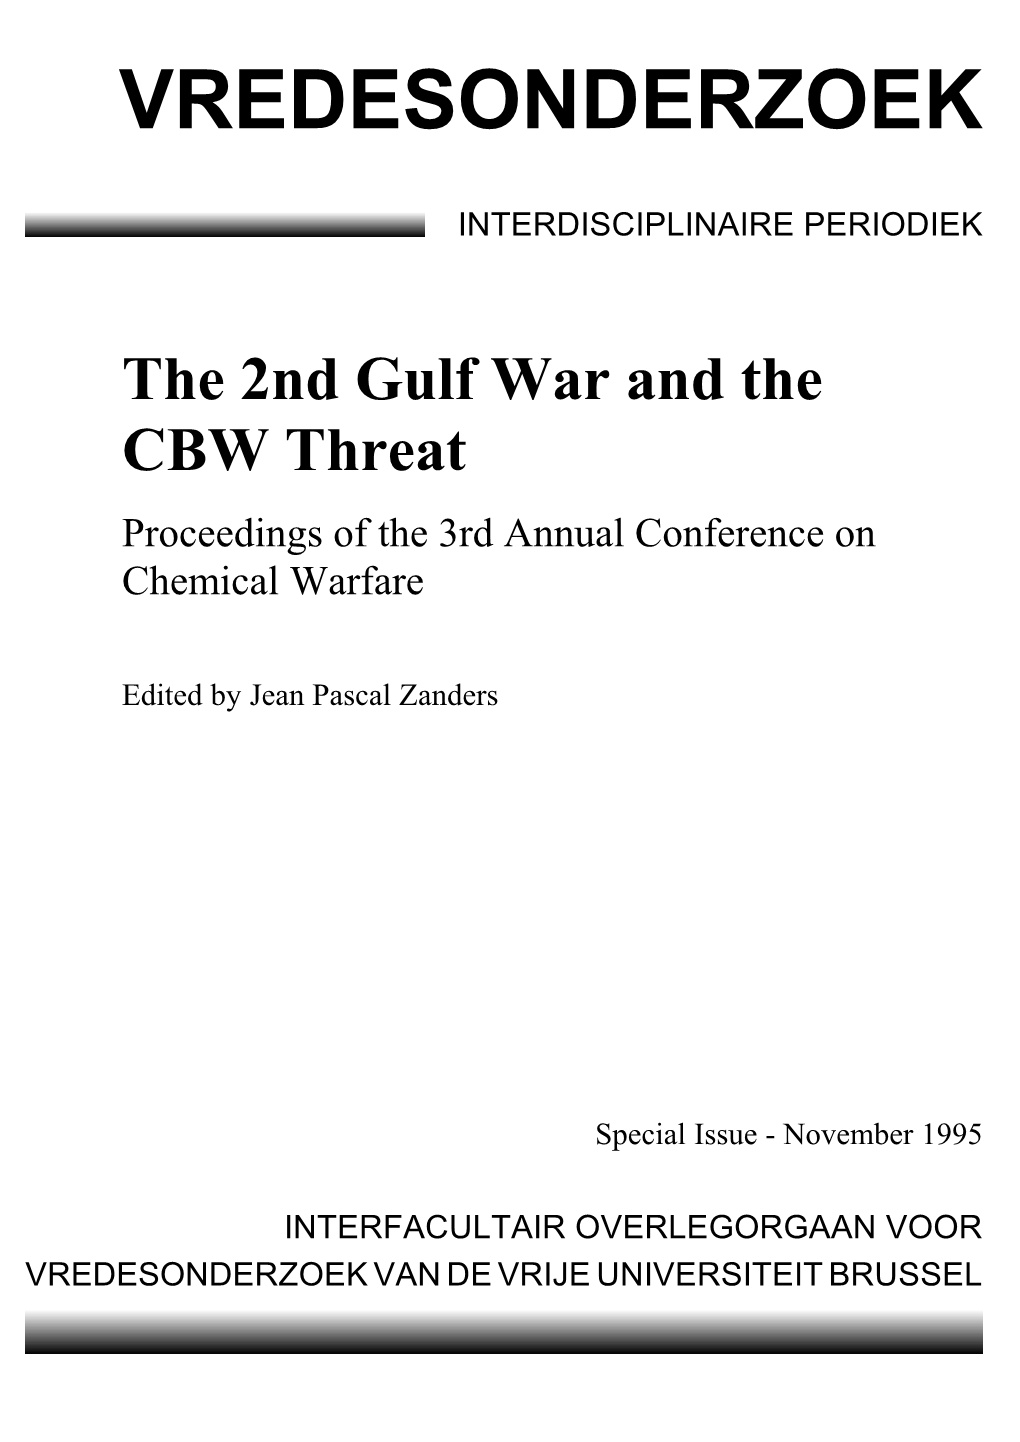 The 2Nd Gulf War and the CBW Threat Proceedings of the 3Rd Annual Conference on Chemical Warfare